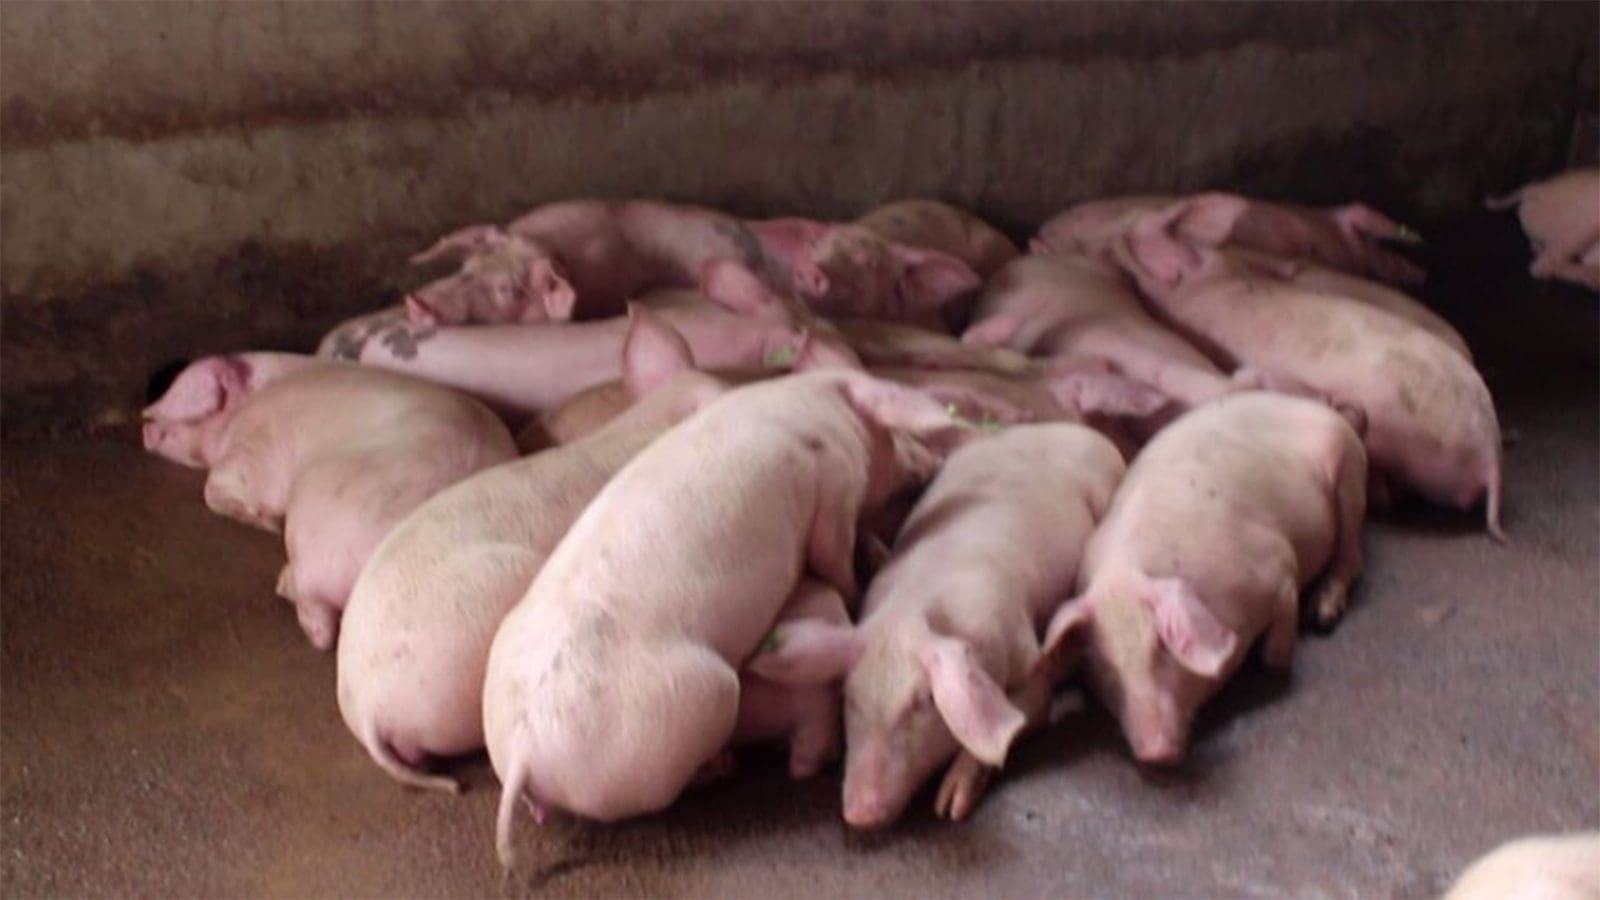 Potential African Swine Fever vaccine offers hope amidst pandemic